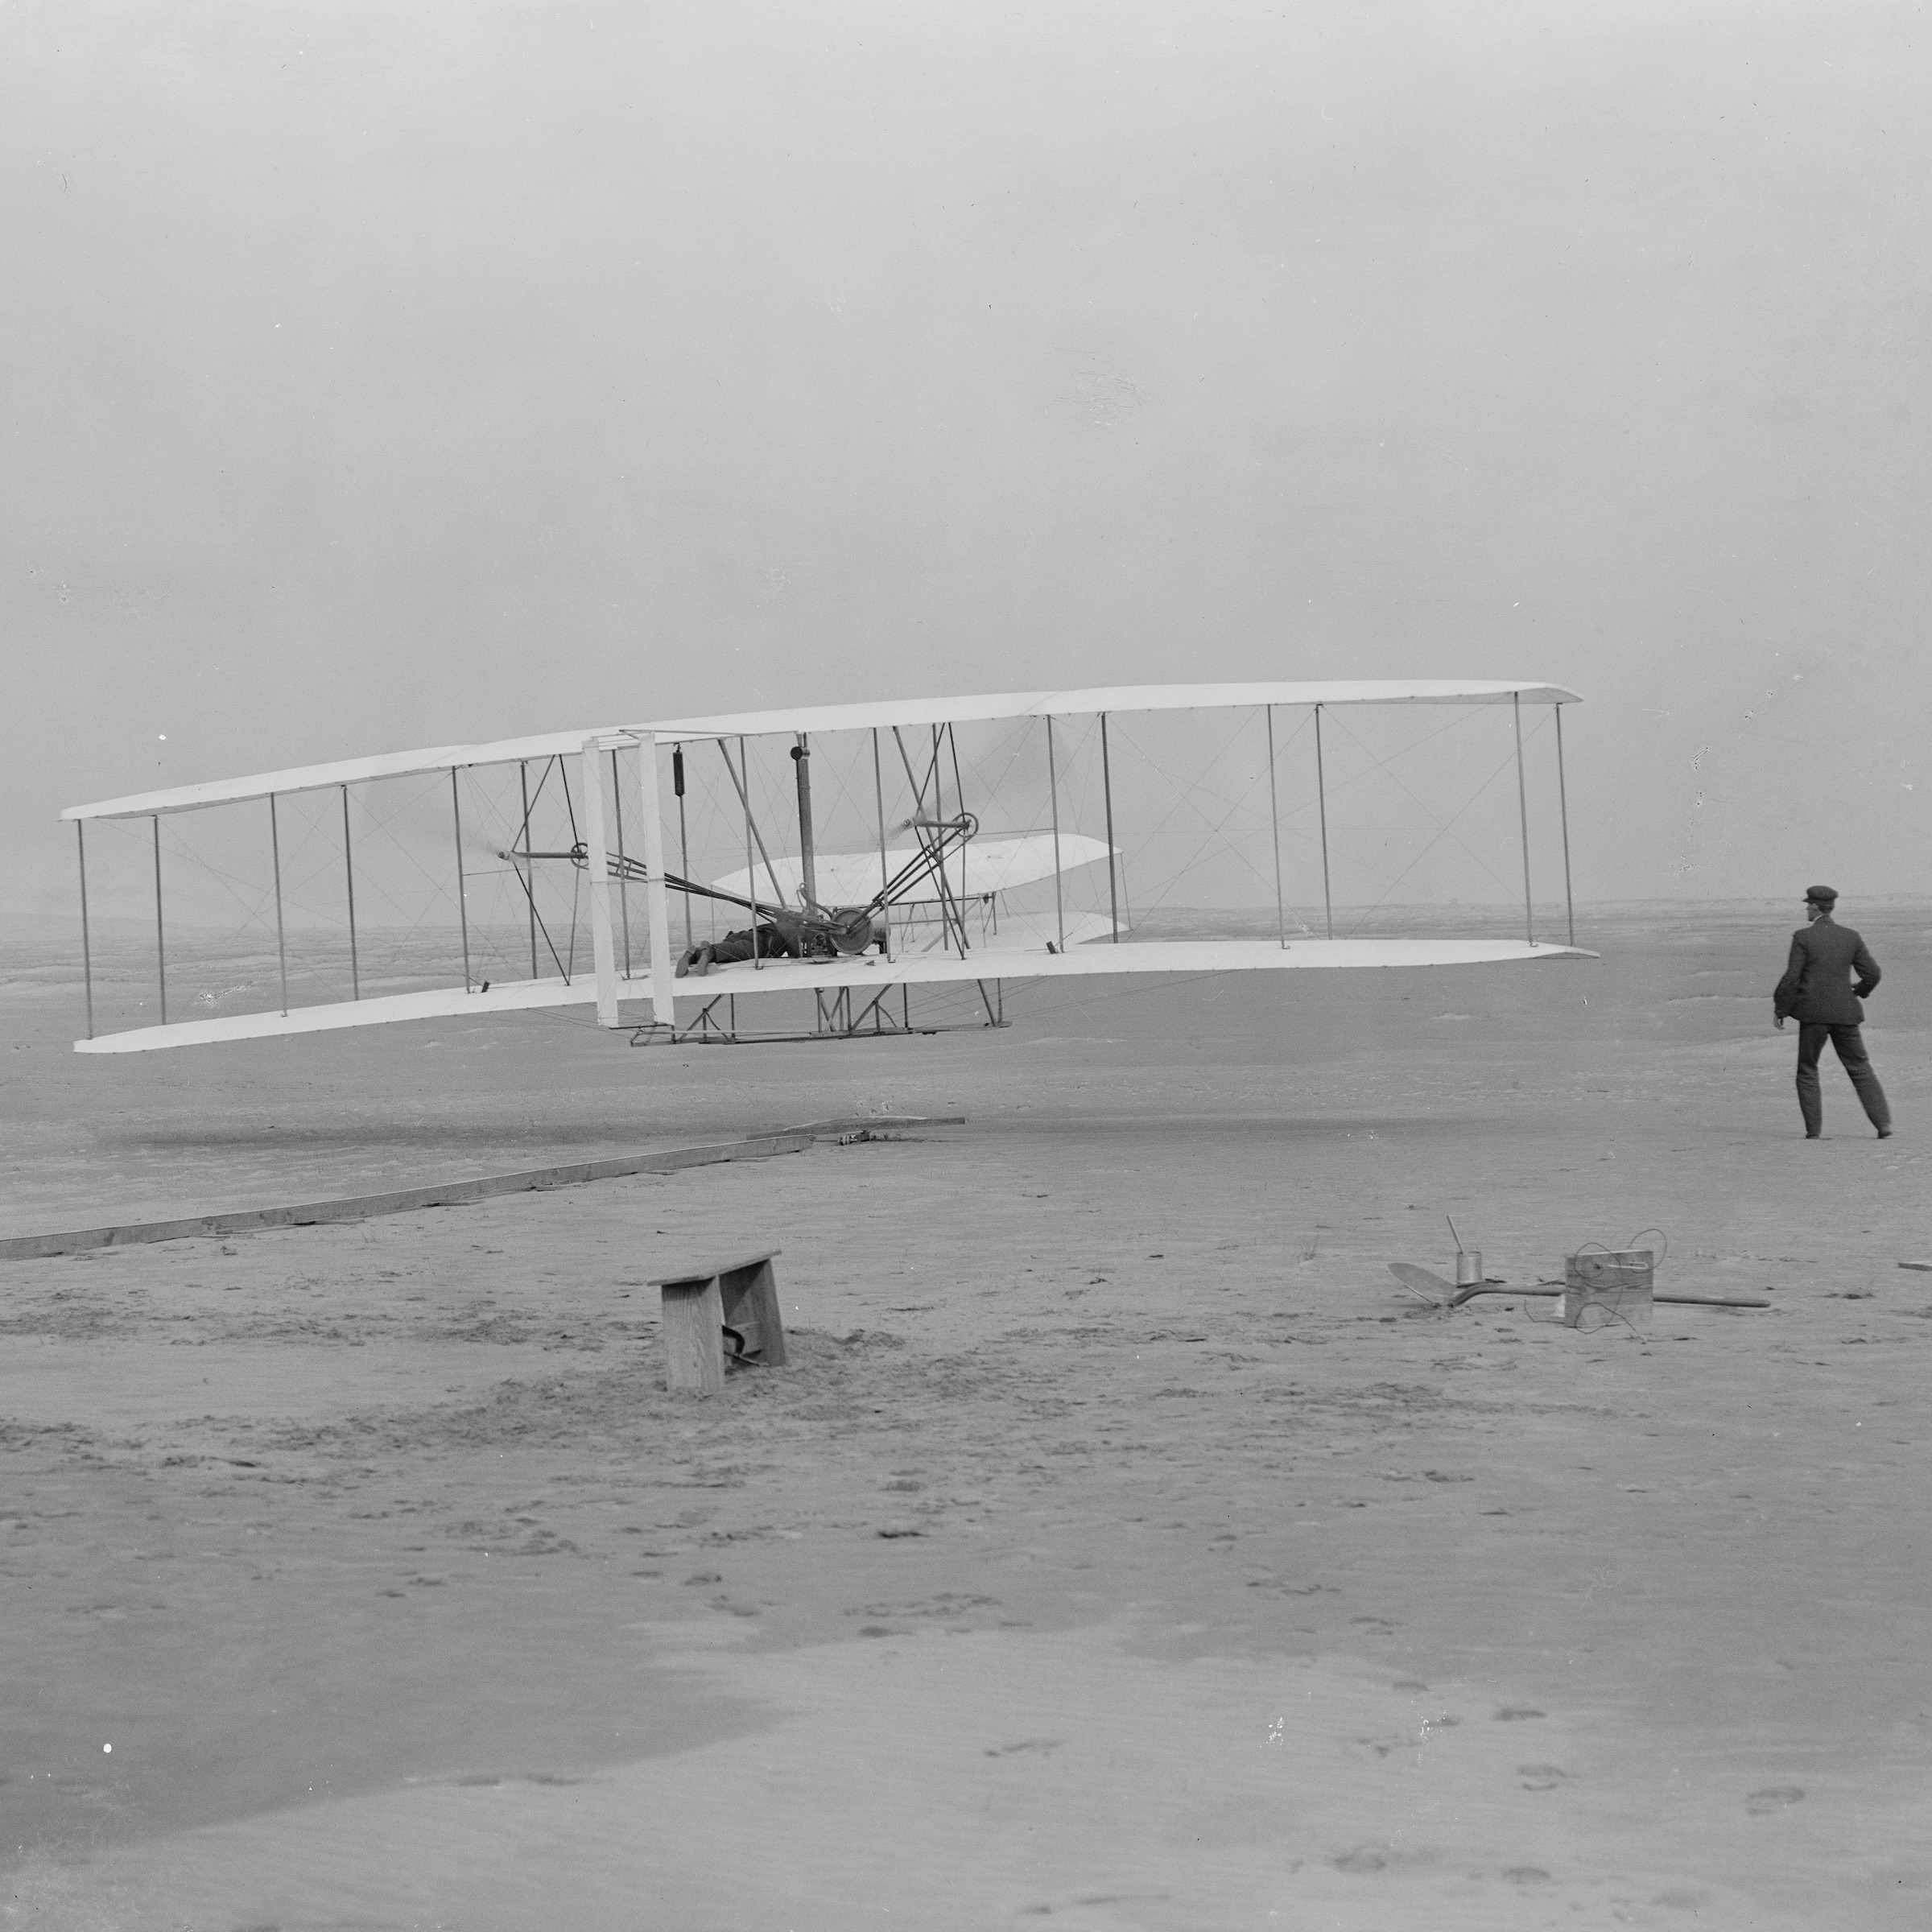 This is a photograph taken a few seconds after the 1903 Wright flyer took off on the first powered airplane flight.